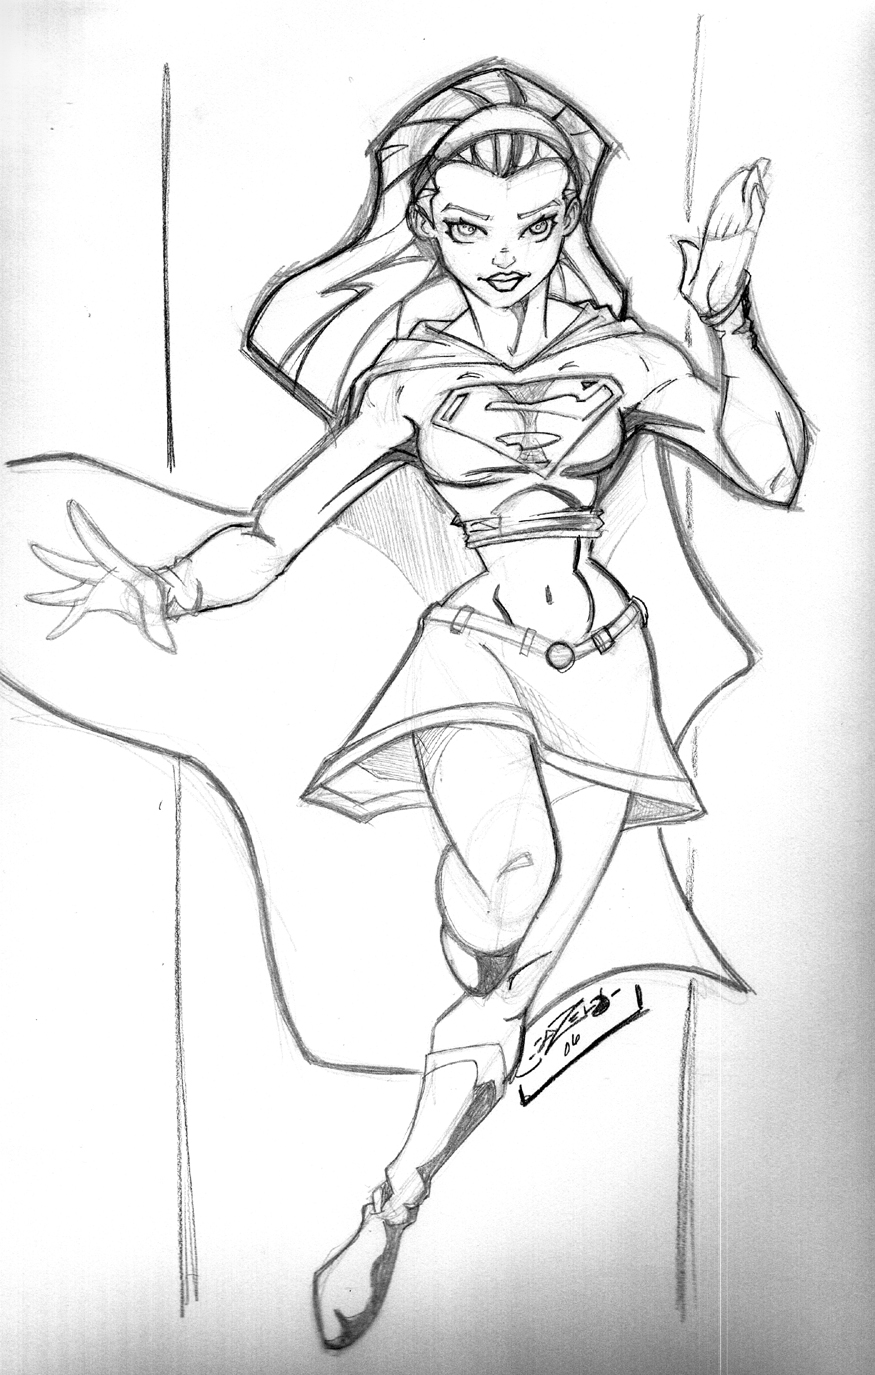 Supergirl-by-Jazzry-2